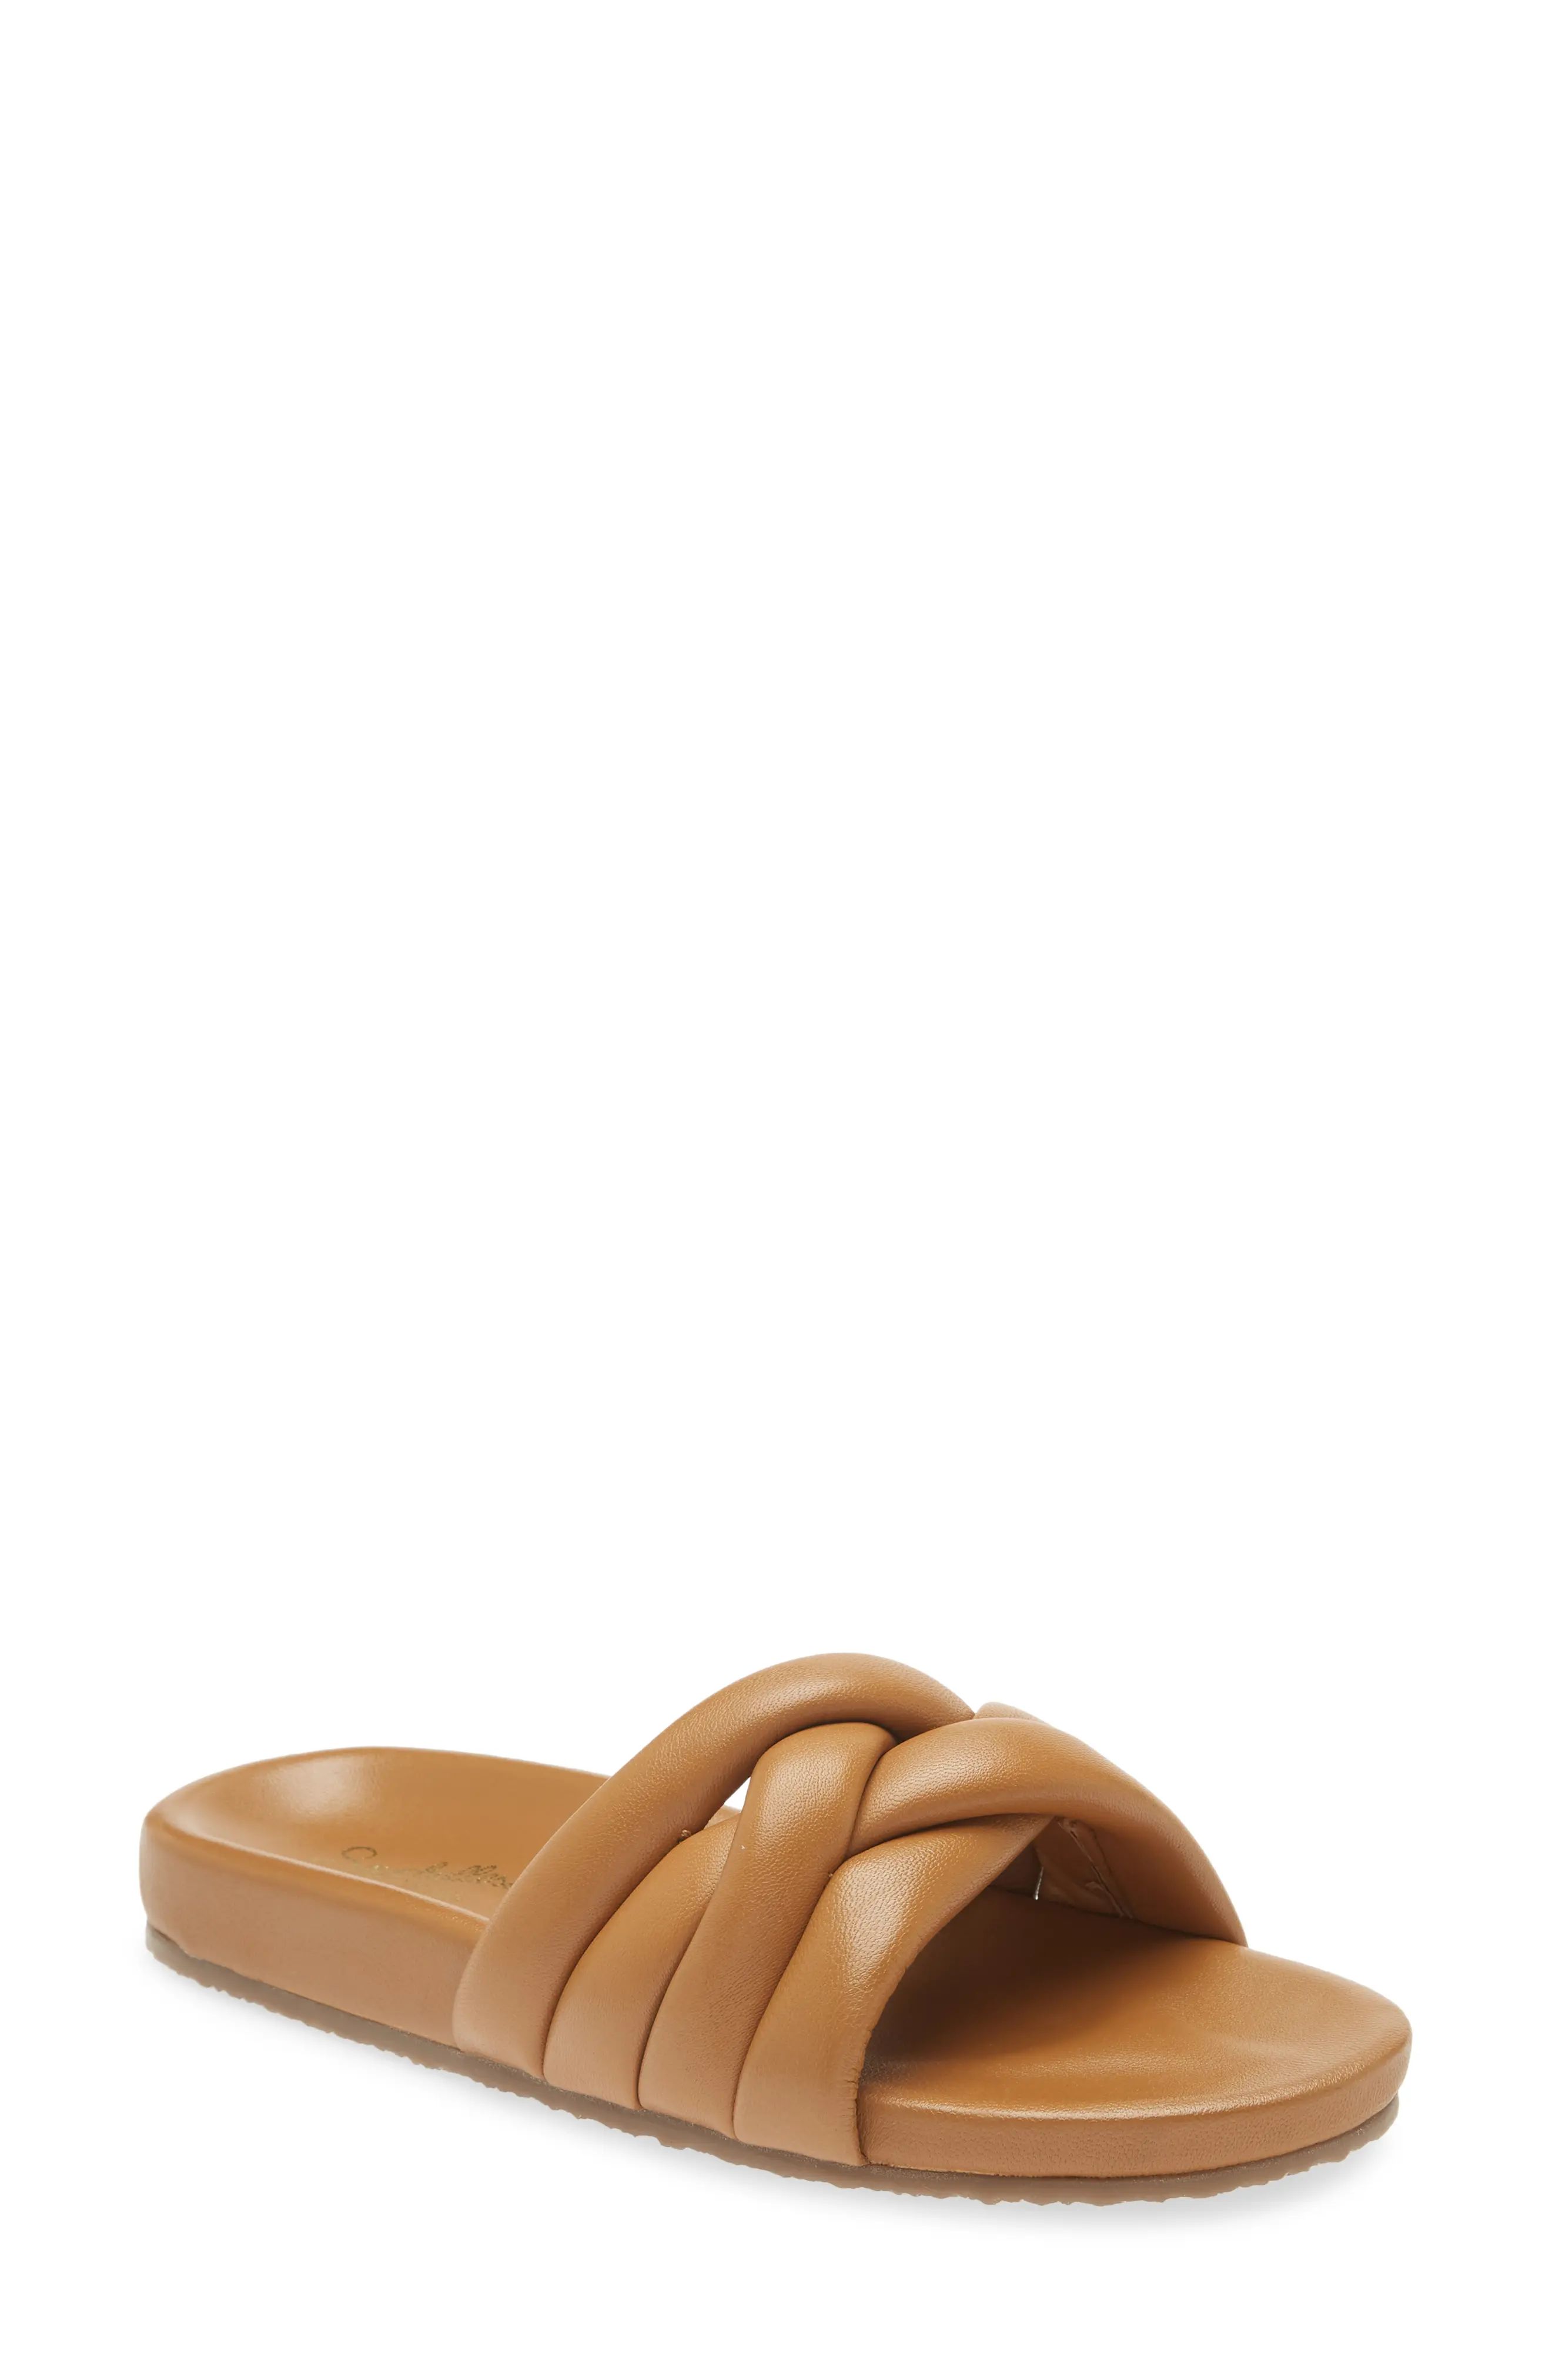 Seychelles Low Key Sandal in Tan Leather at Nordstrom, Size 6 | Nordstrom